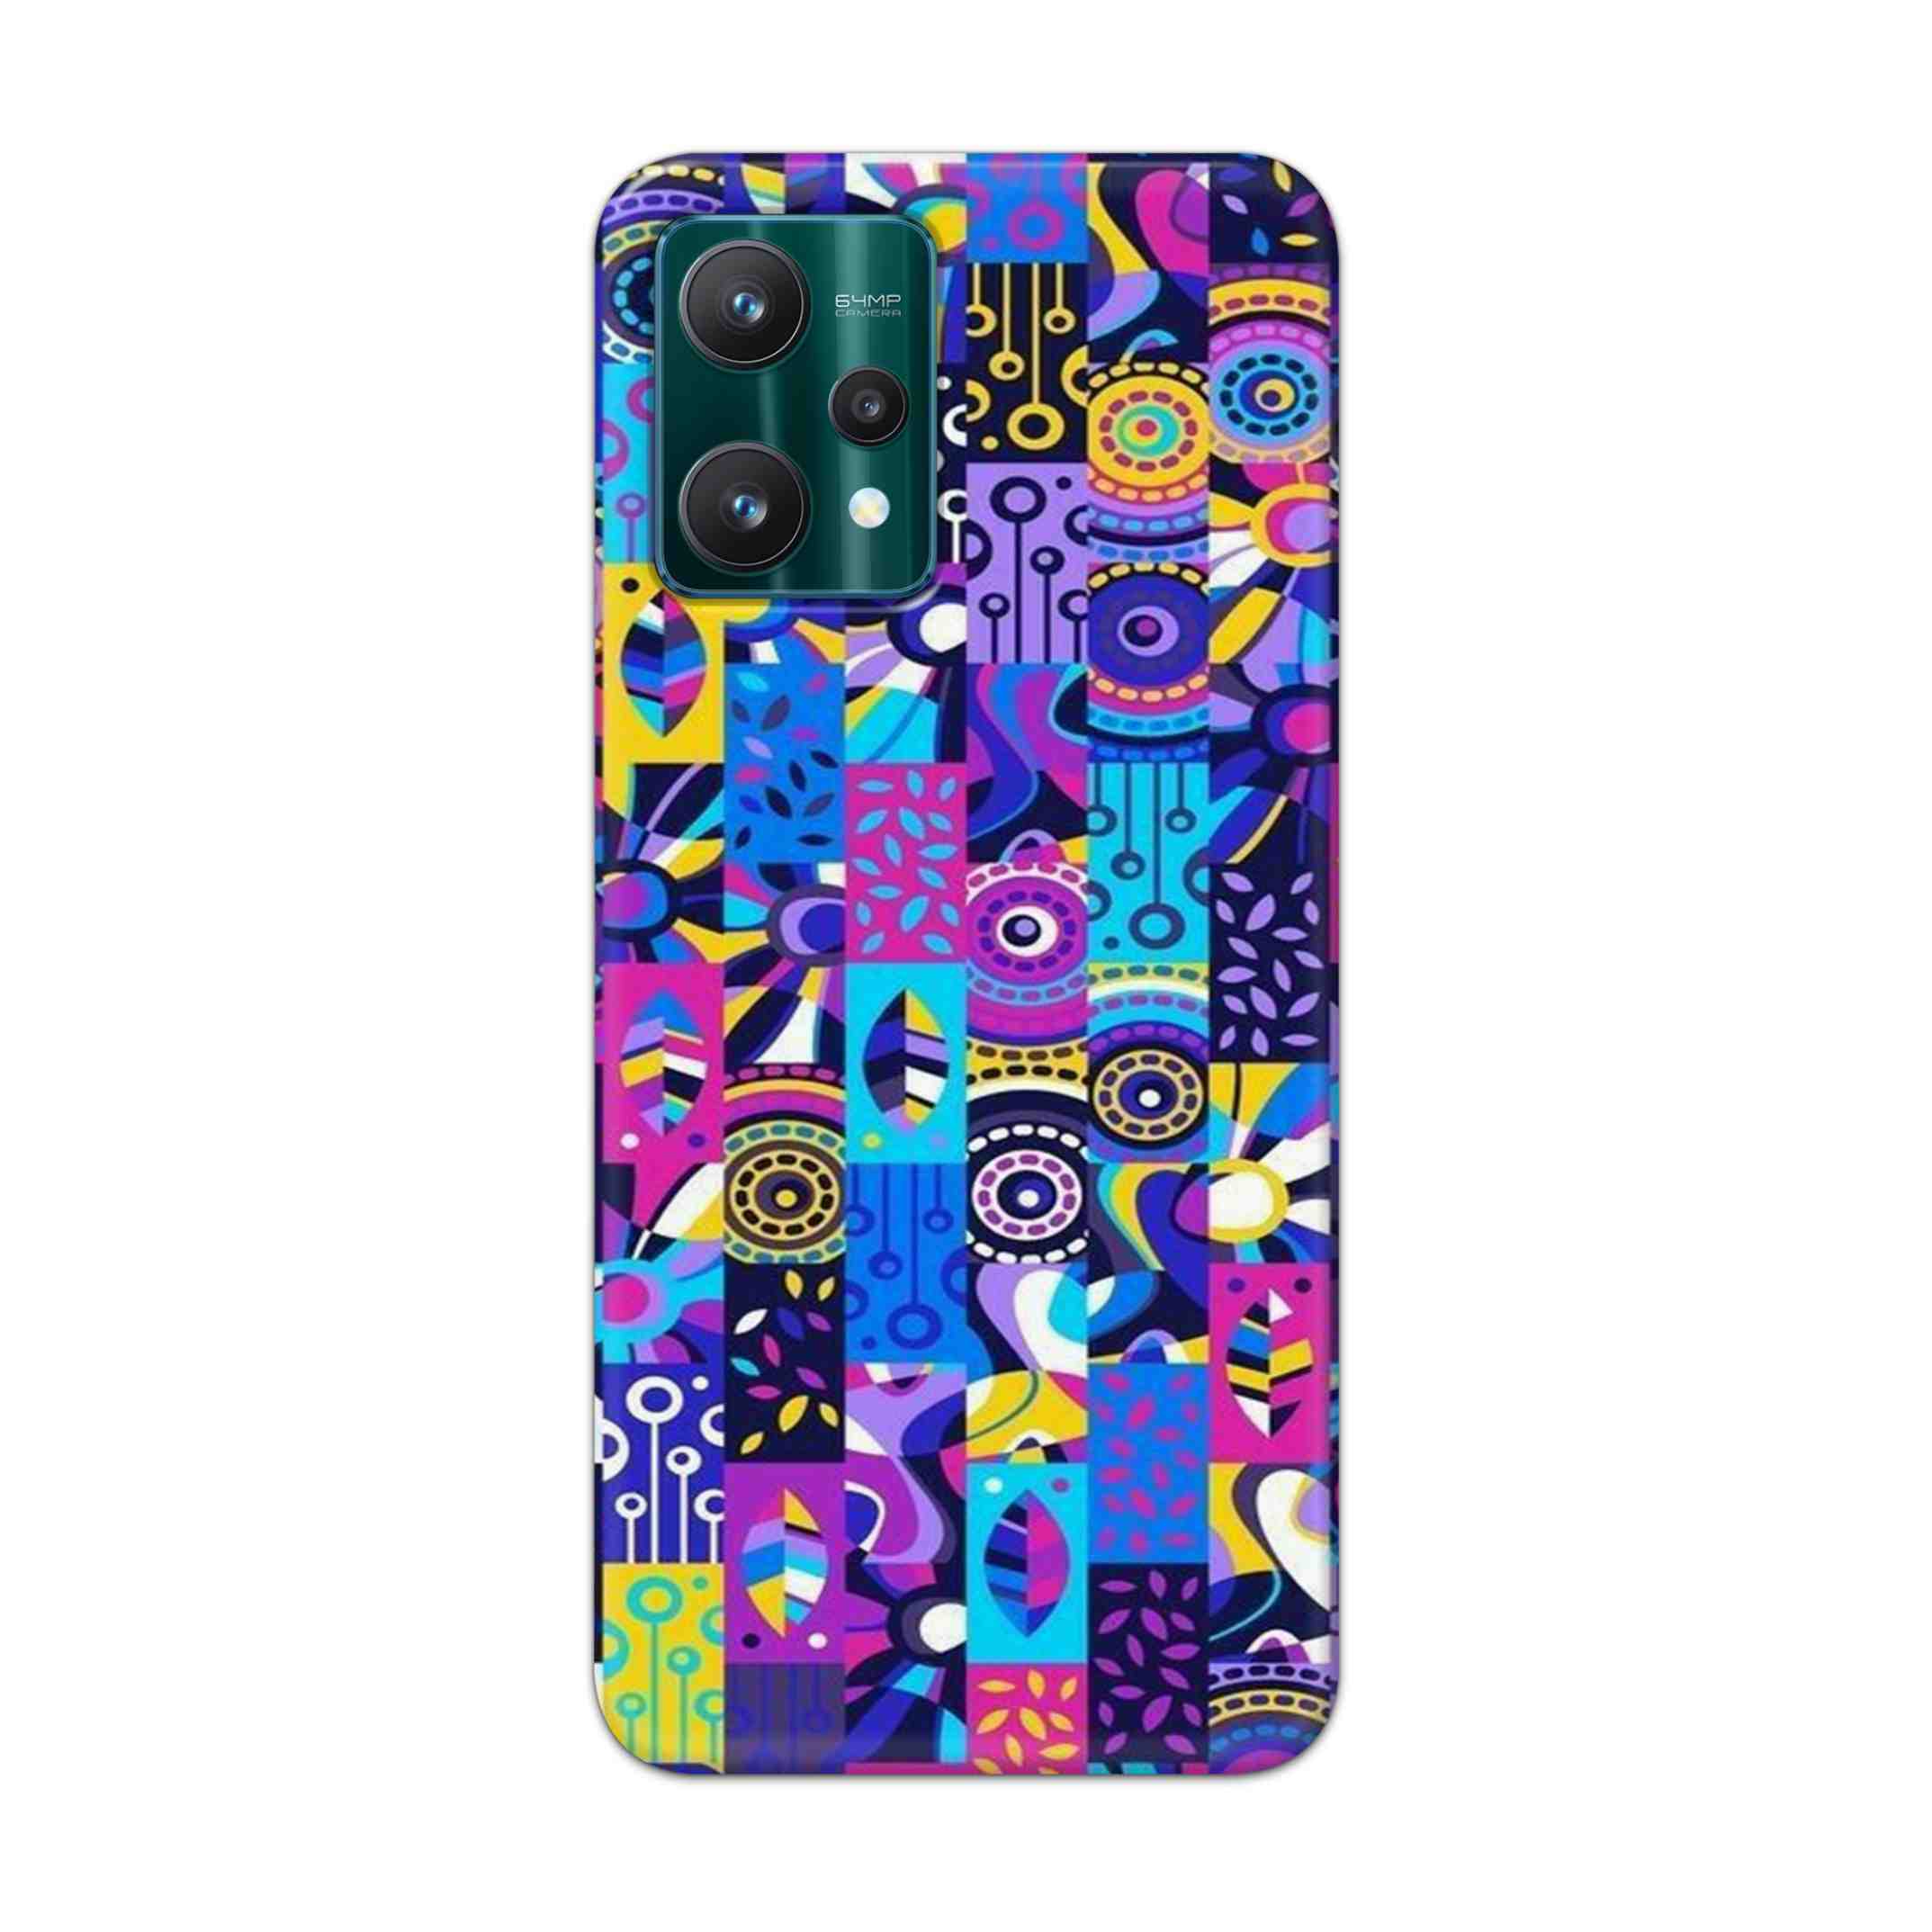 Buy Rainbow Art Hard Back Mobile Phone Case Cover For Realme 9 Pro Online